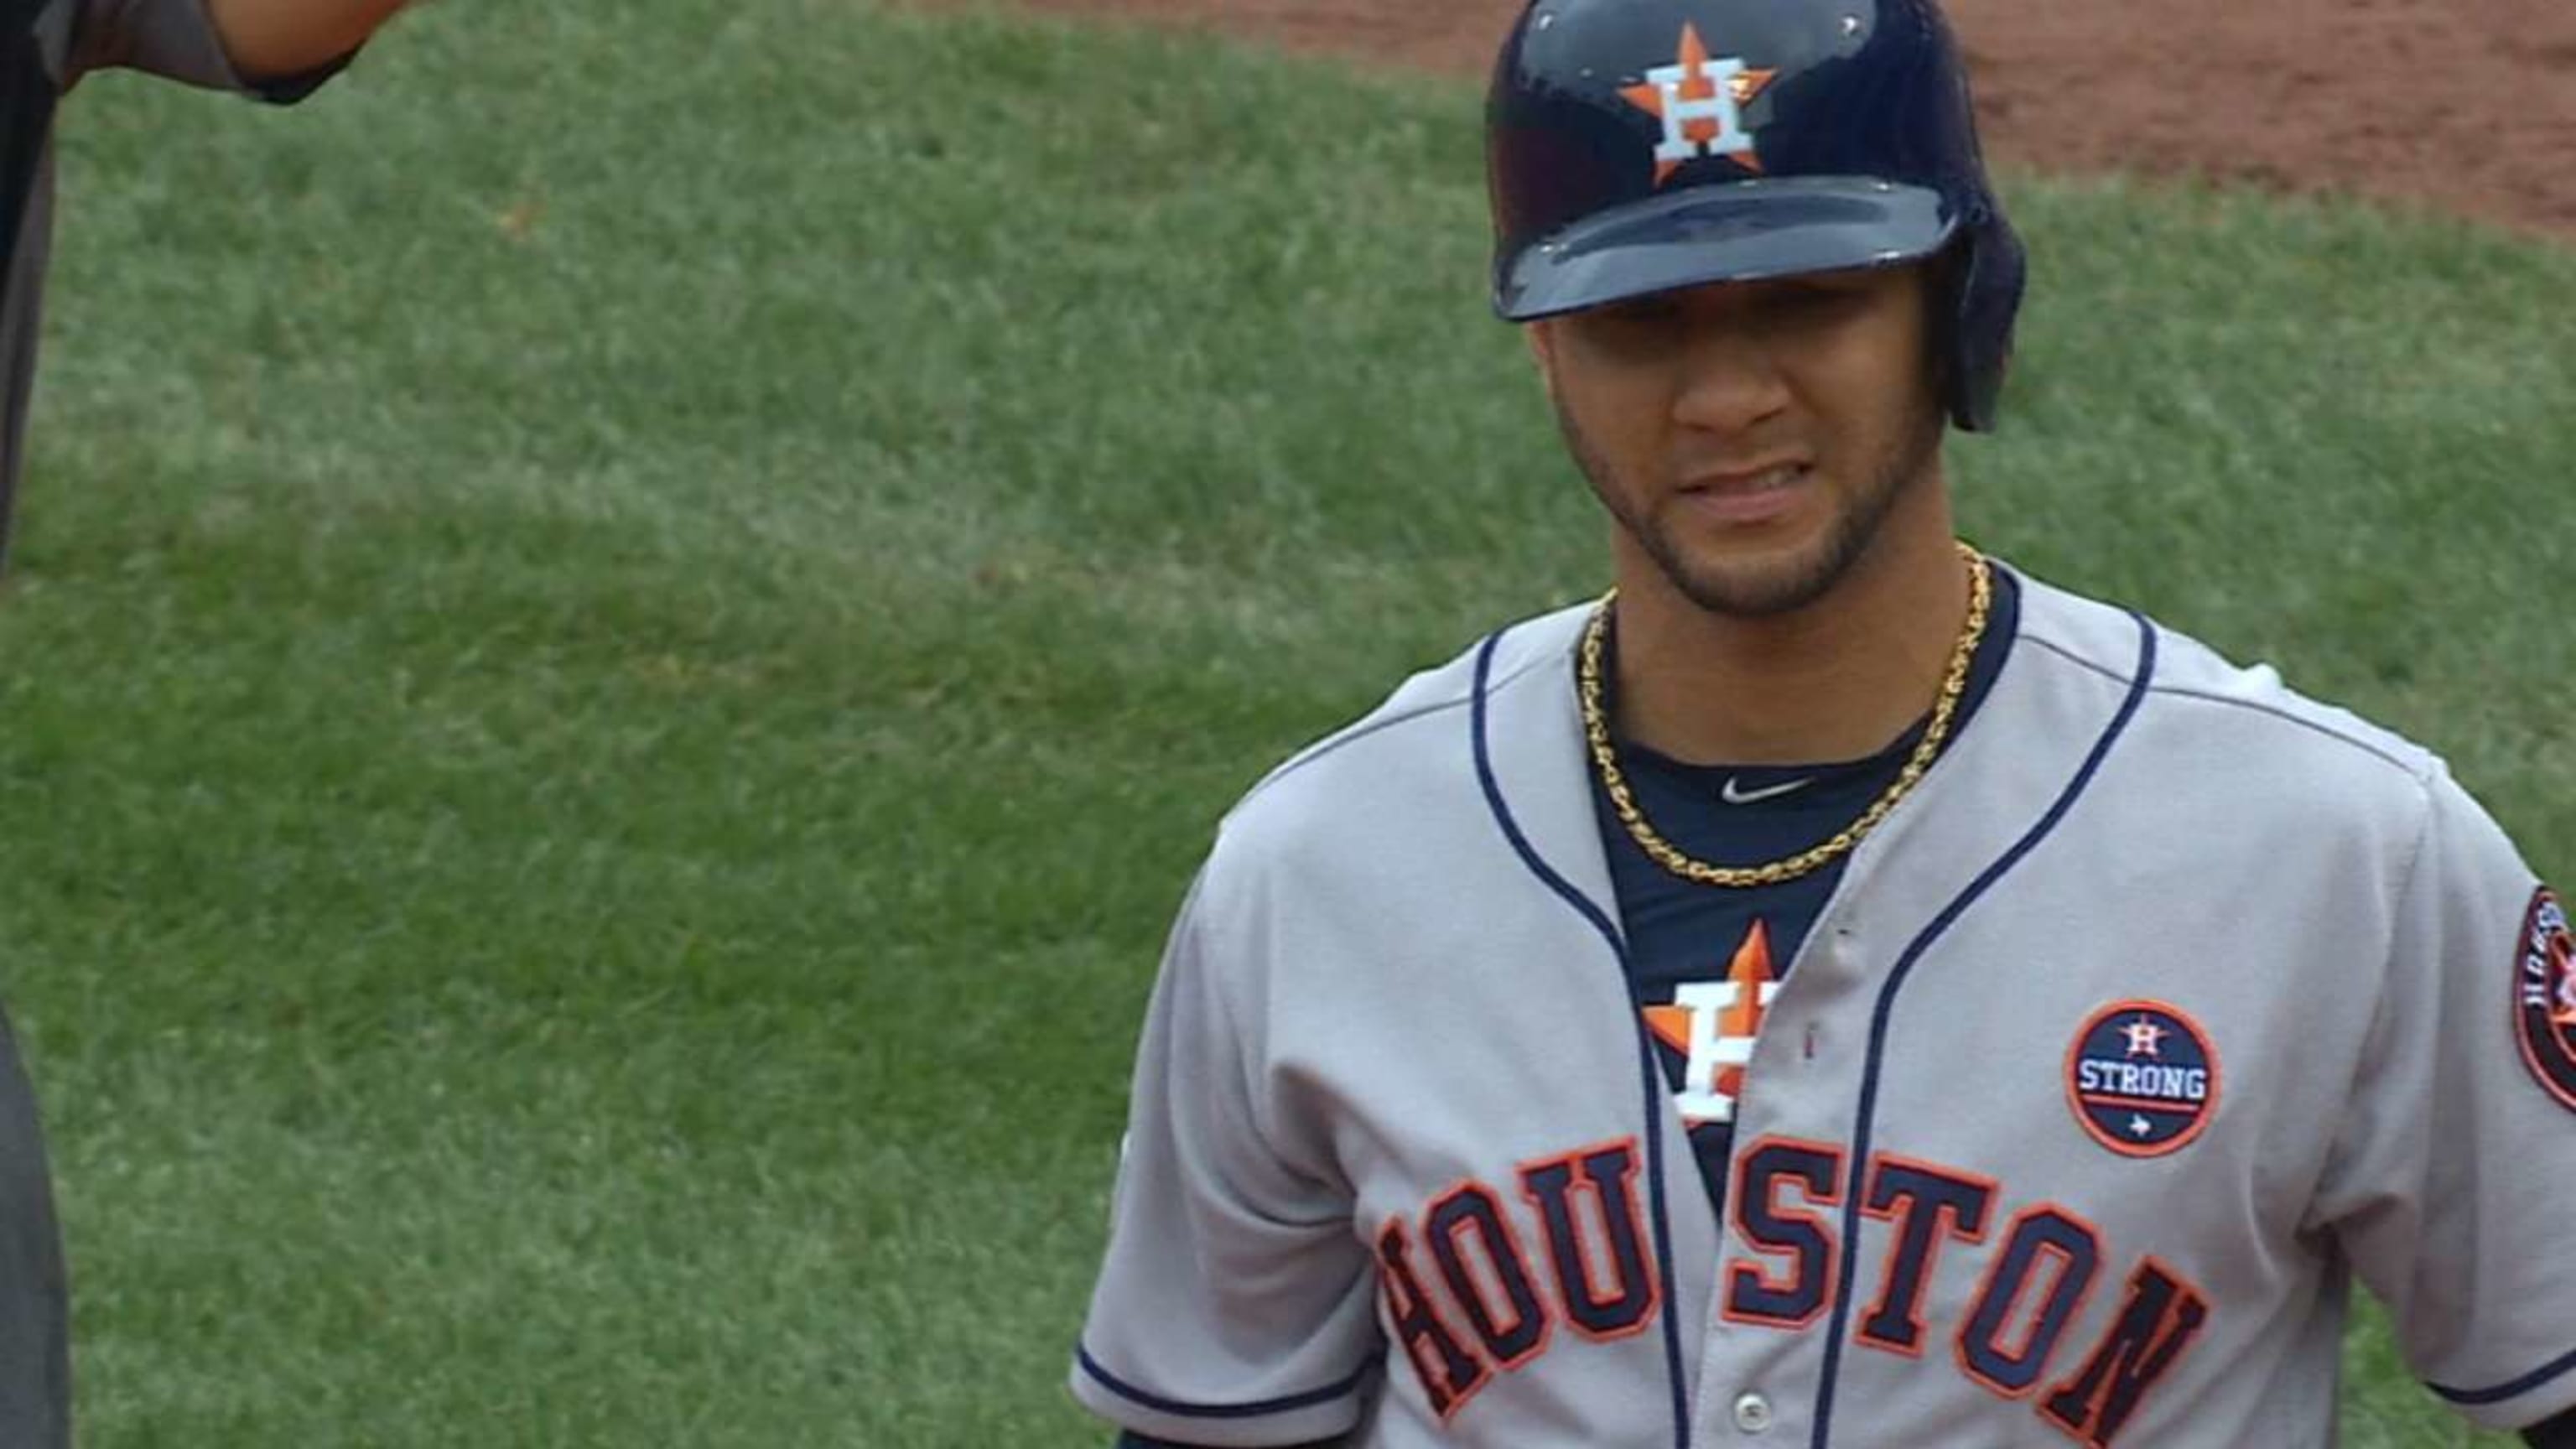 Yuli Gurriel to leave H-Town's Astros, MLB source says